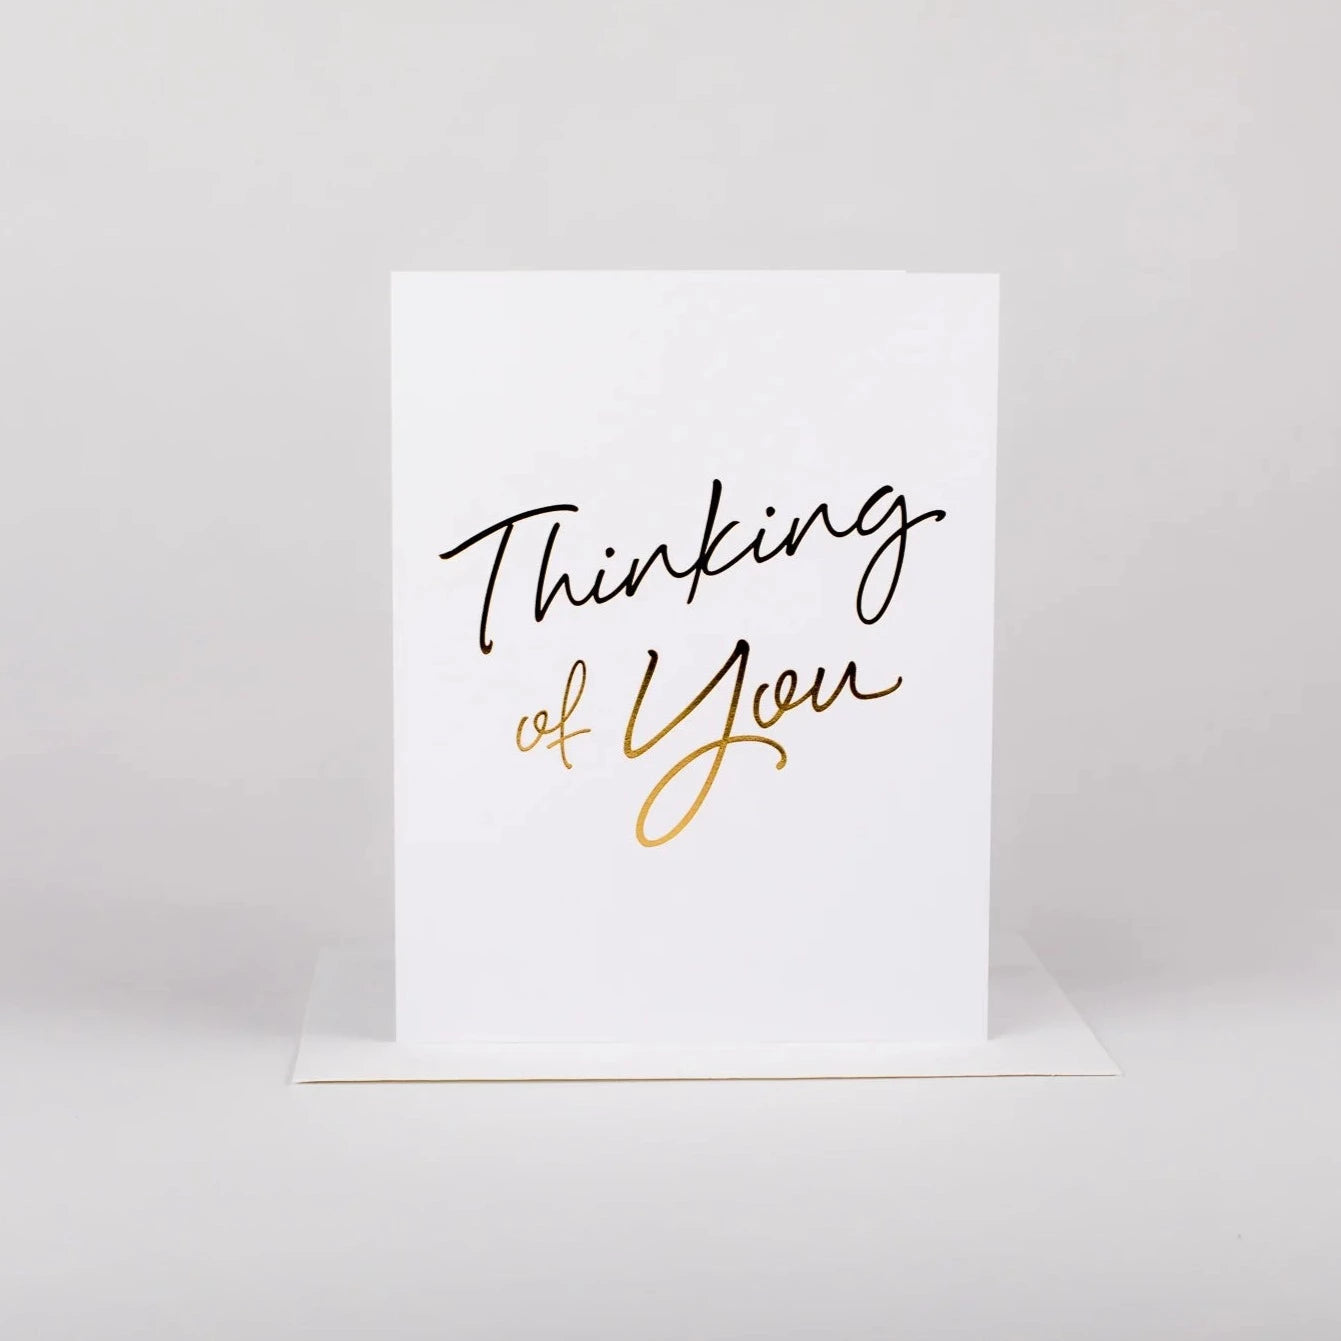 Thinking of You - Card